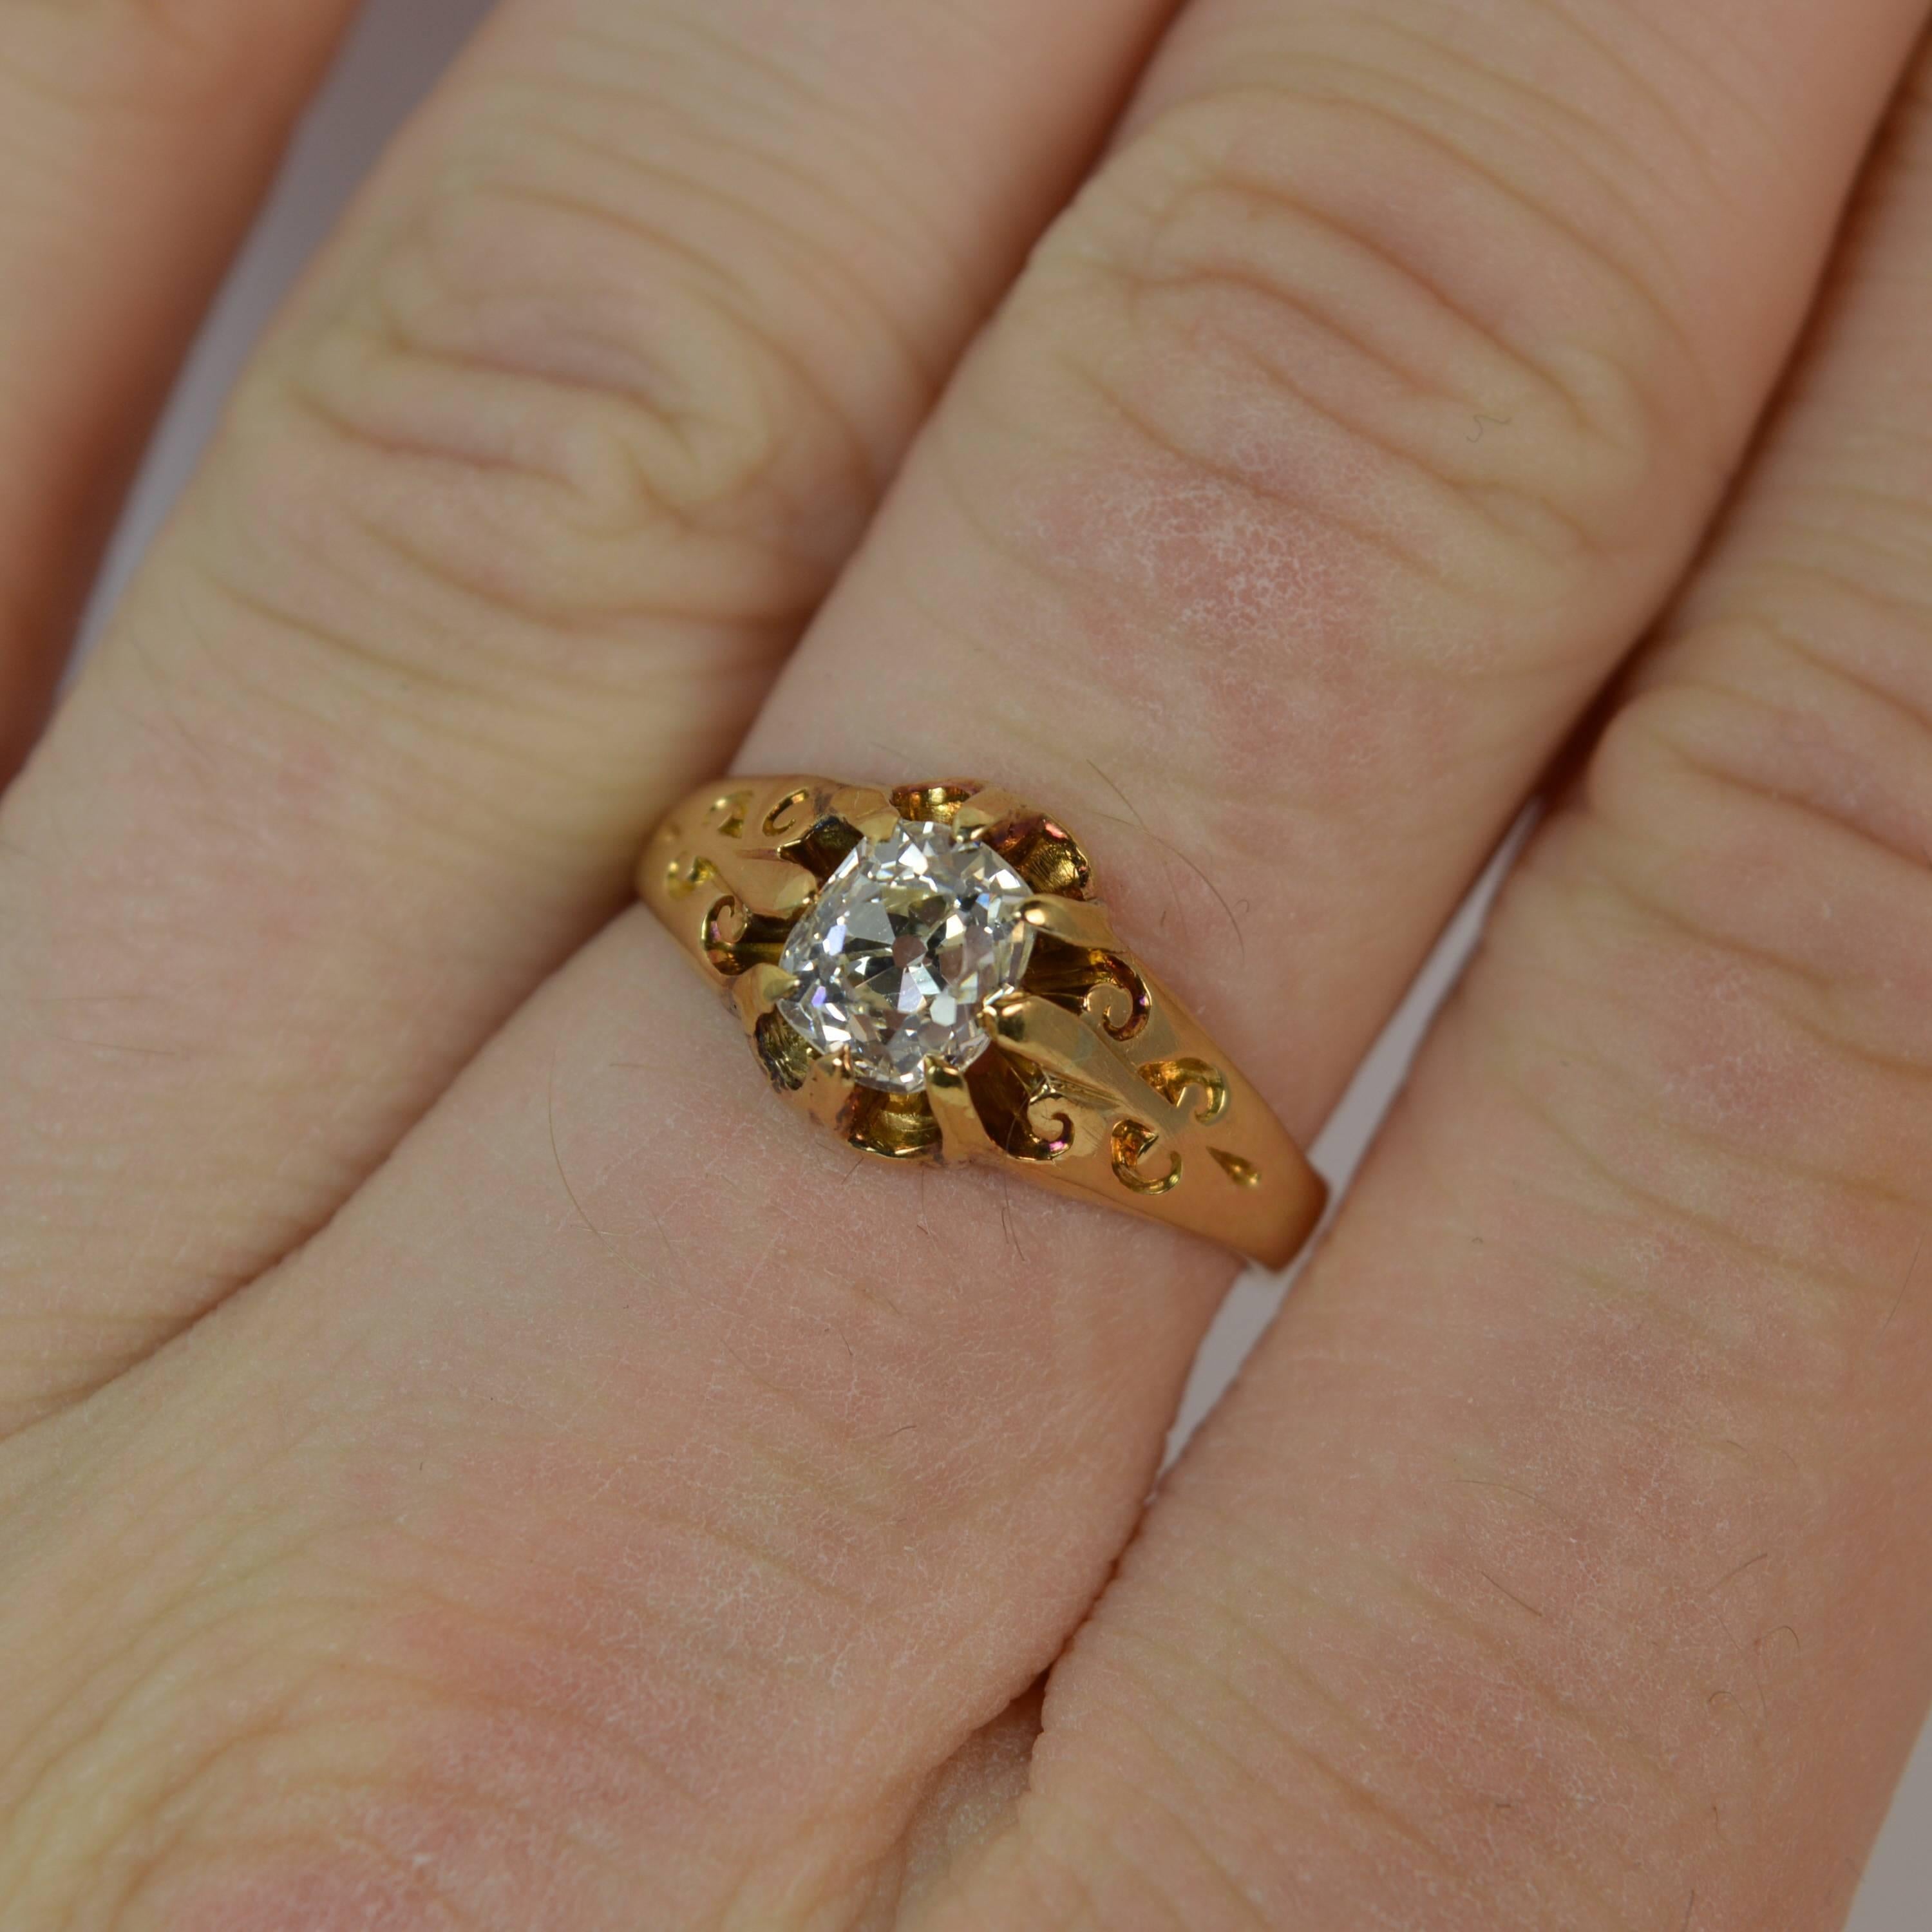 

A true antique ring modelled in 18 carat gold..

​The natural single stone is of old cushion cut to measure approx 5.6mm x 6.2mm x 4.2mm and weight 1.02 carats.

​The diamond is a clean and clear example with lovely sparkly. Vs clarity mounted